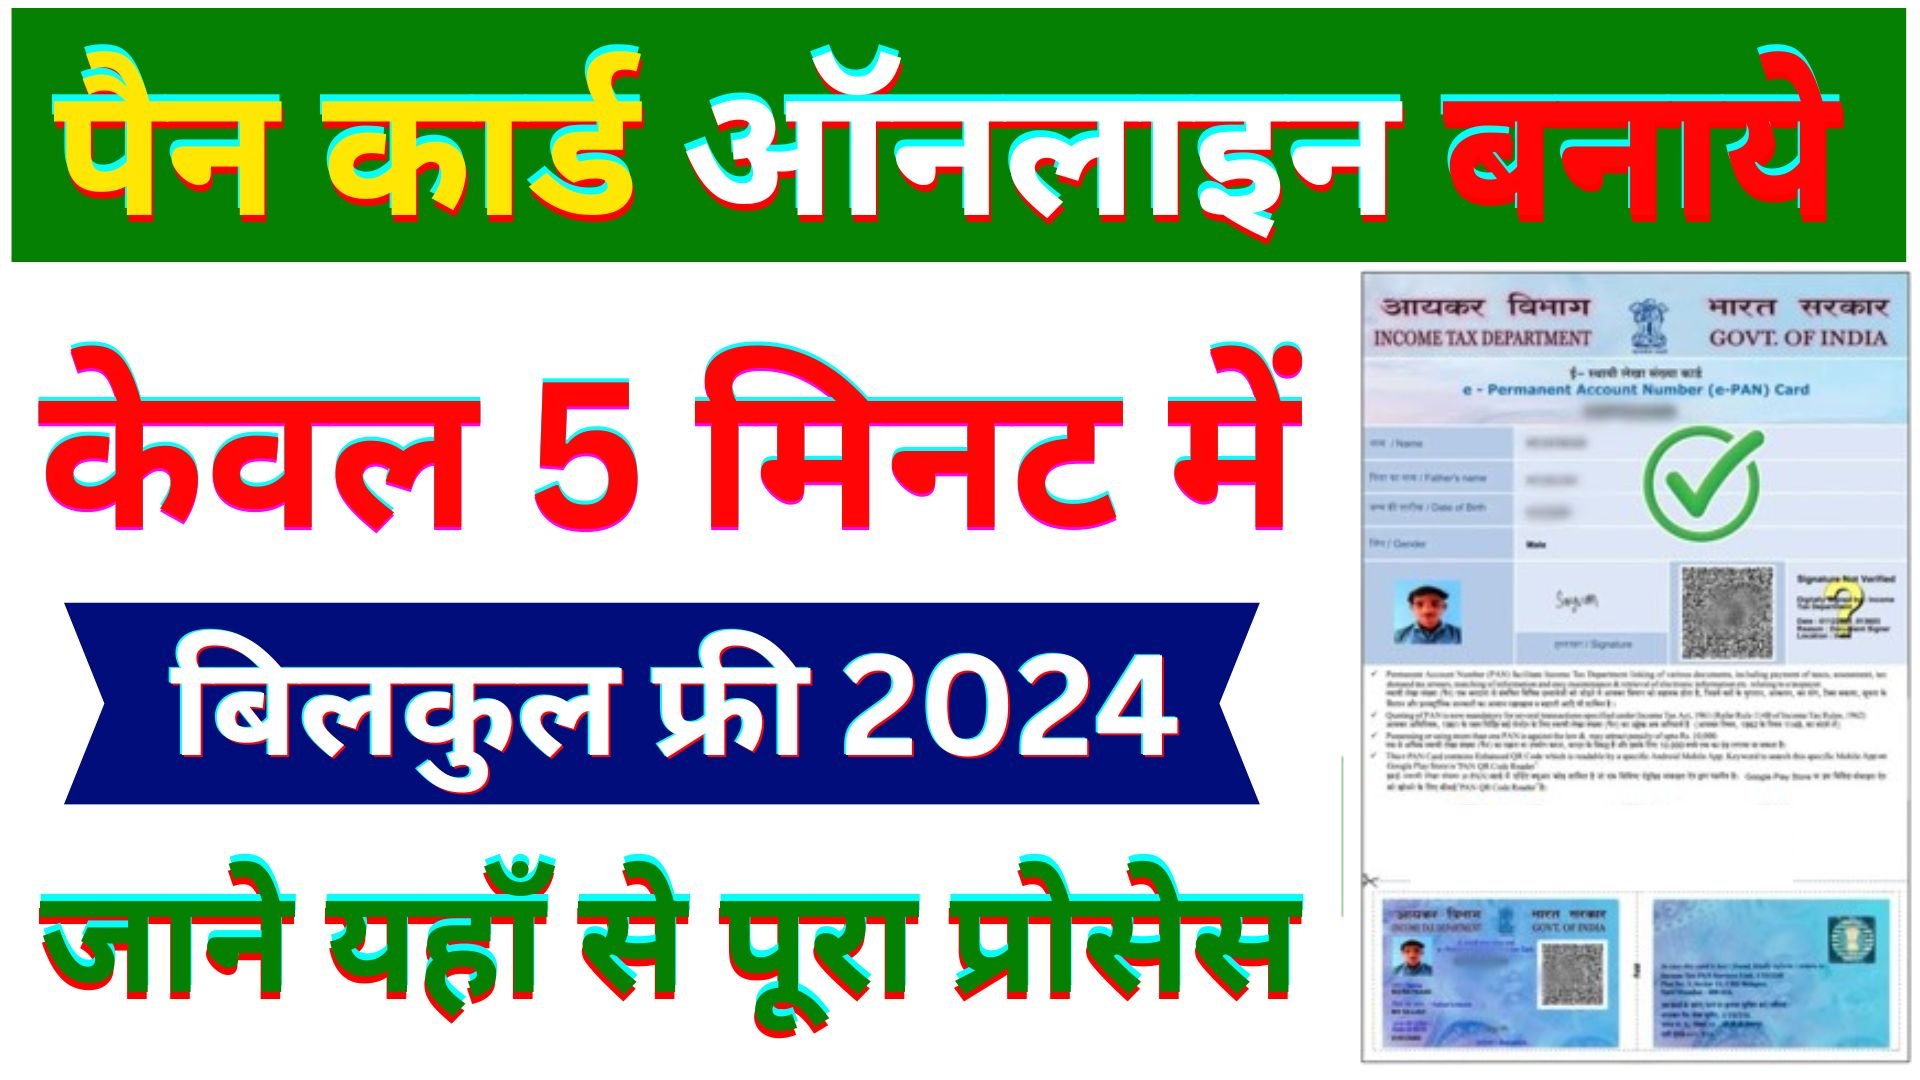 Instant Pan Card Apply Online 2024 : Pan Card Apply Online | E Pan Card Kaise Download